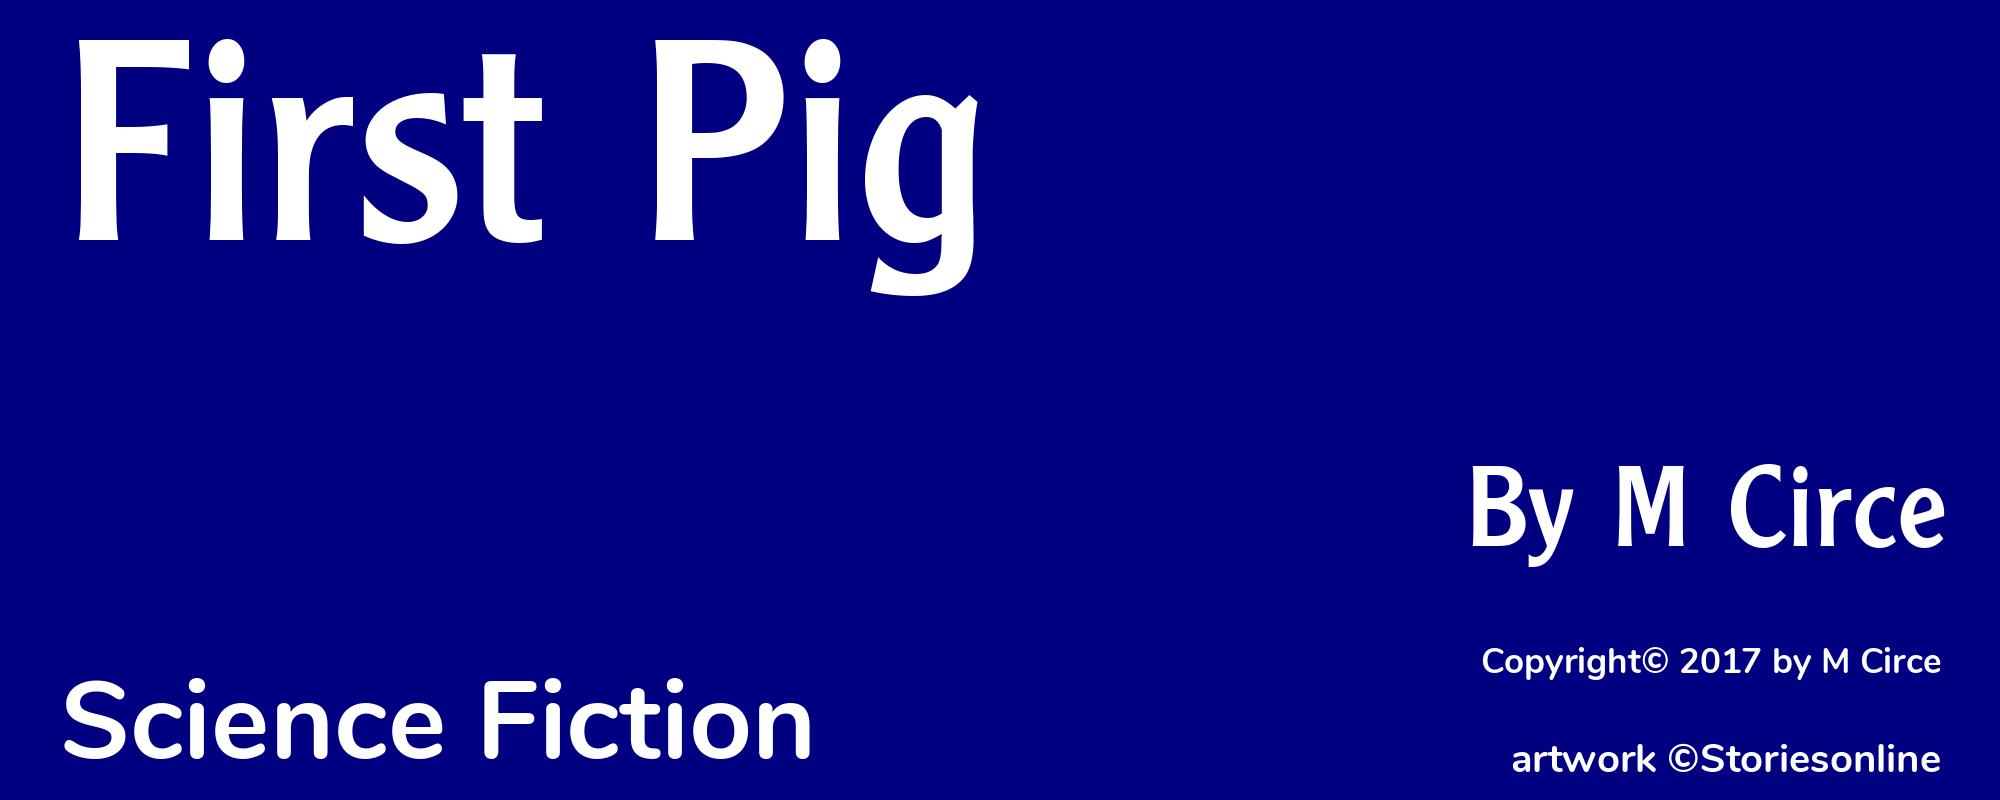 First Pig - Cover